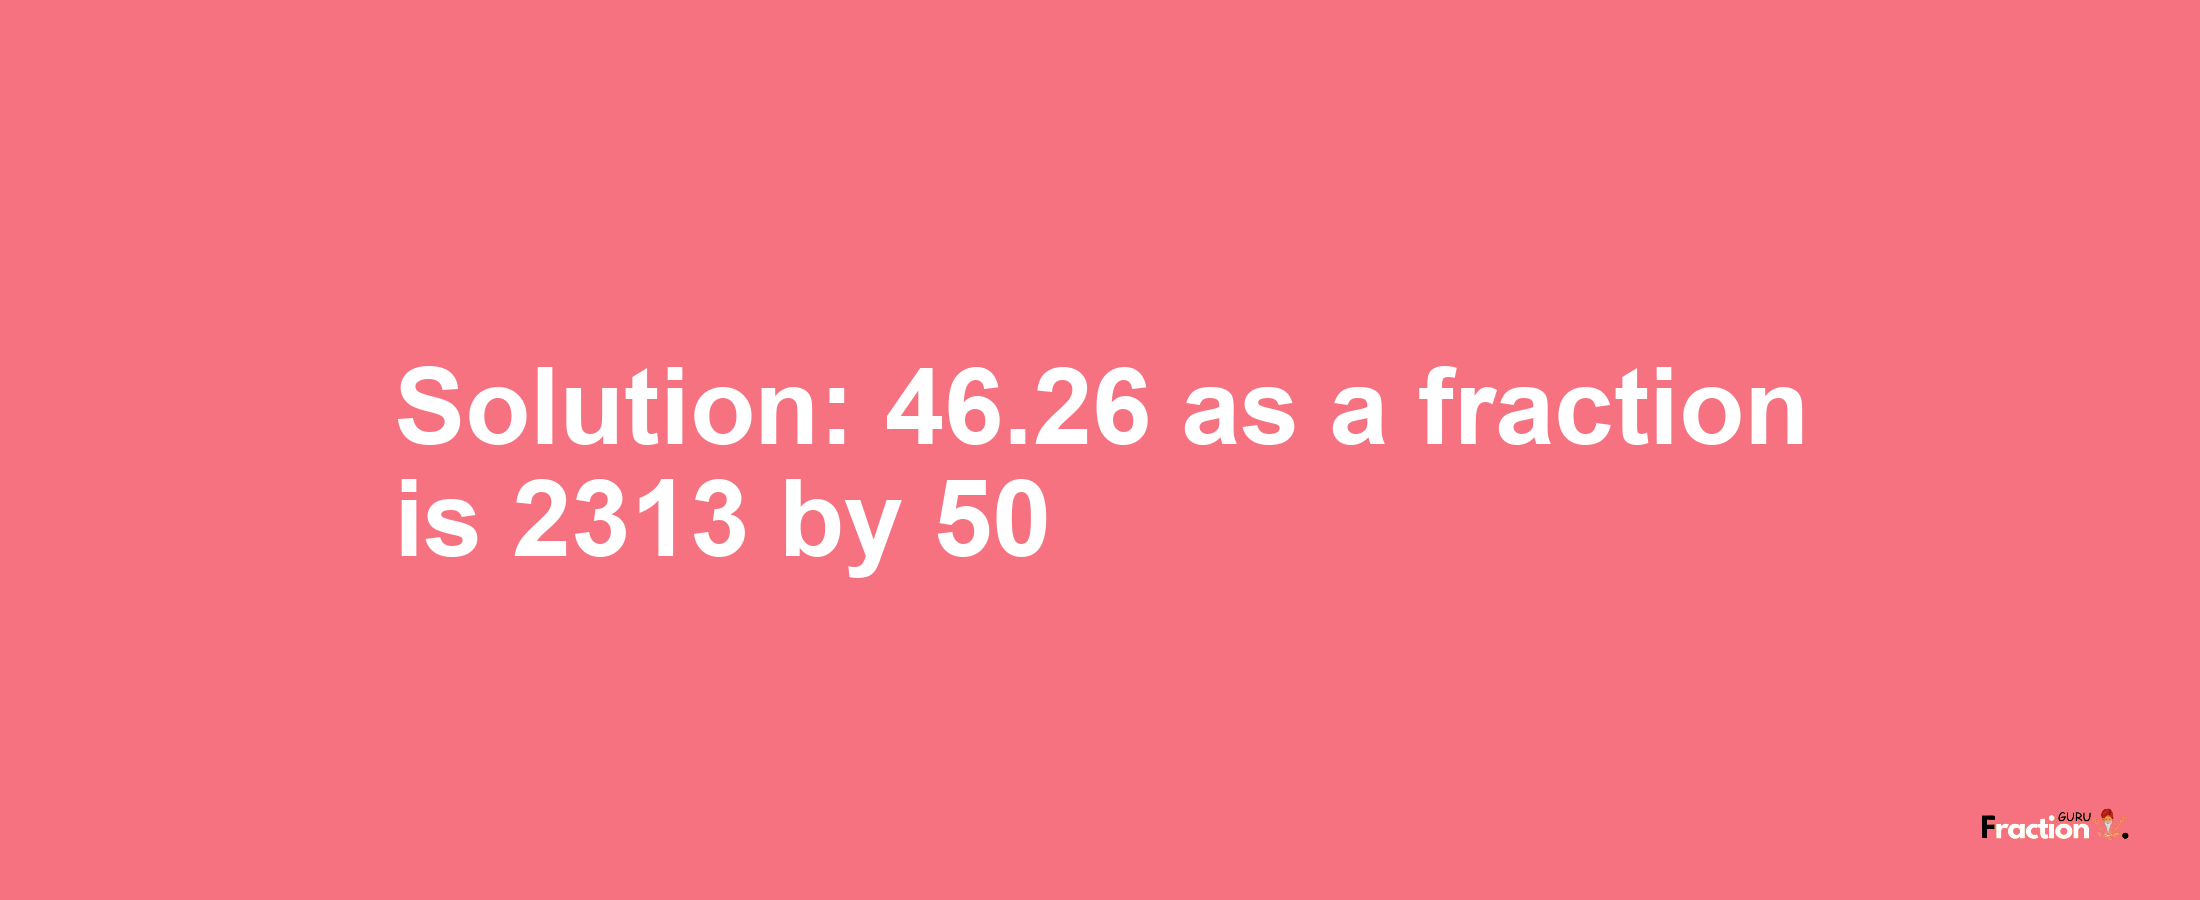 Solution:46.26 as a fraction is 2313/50